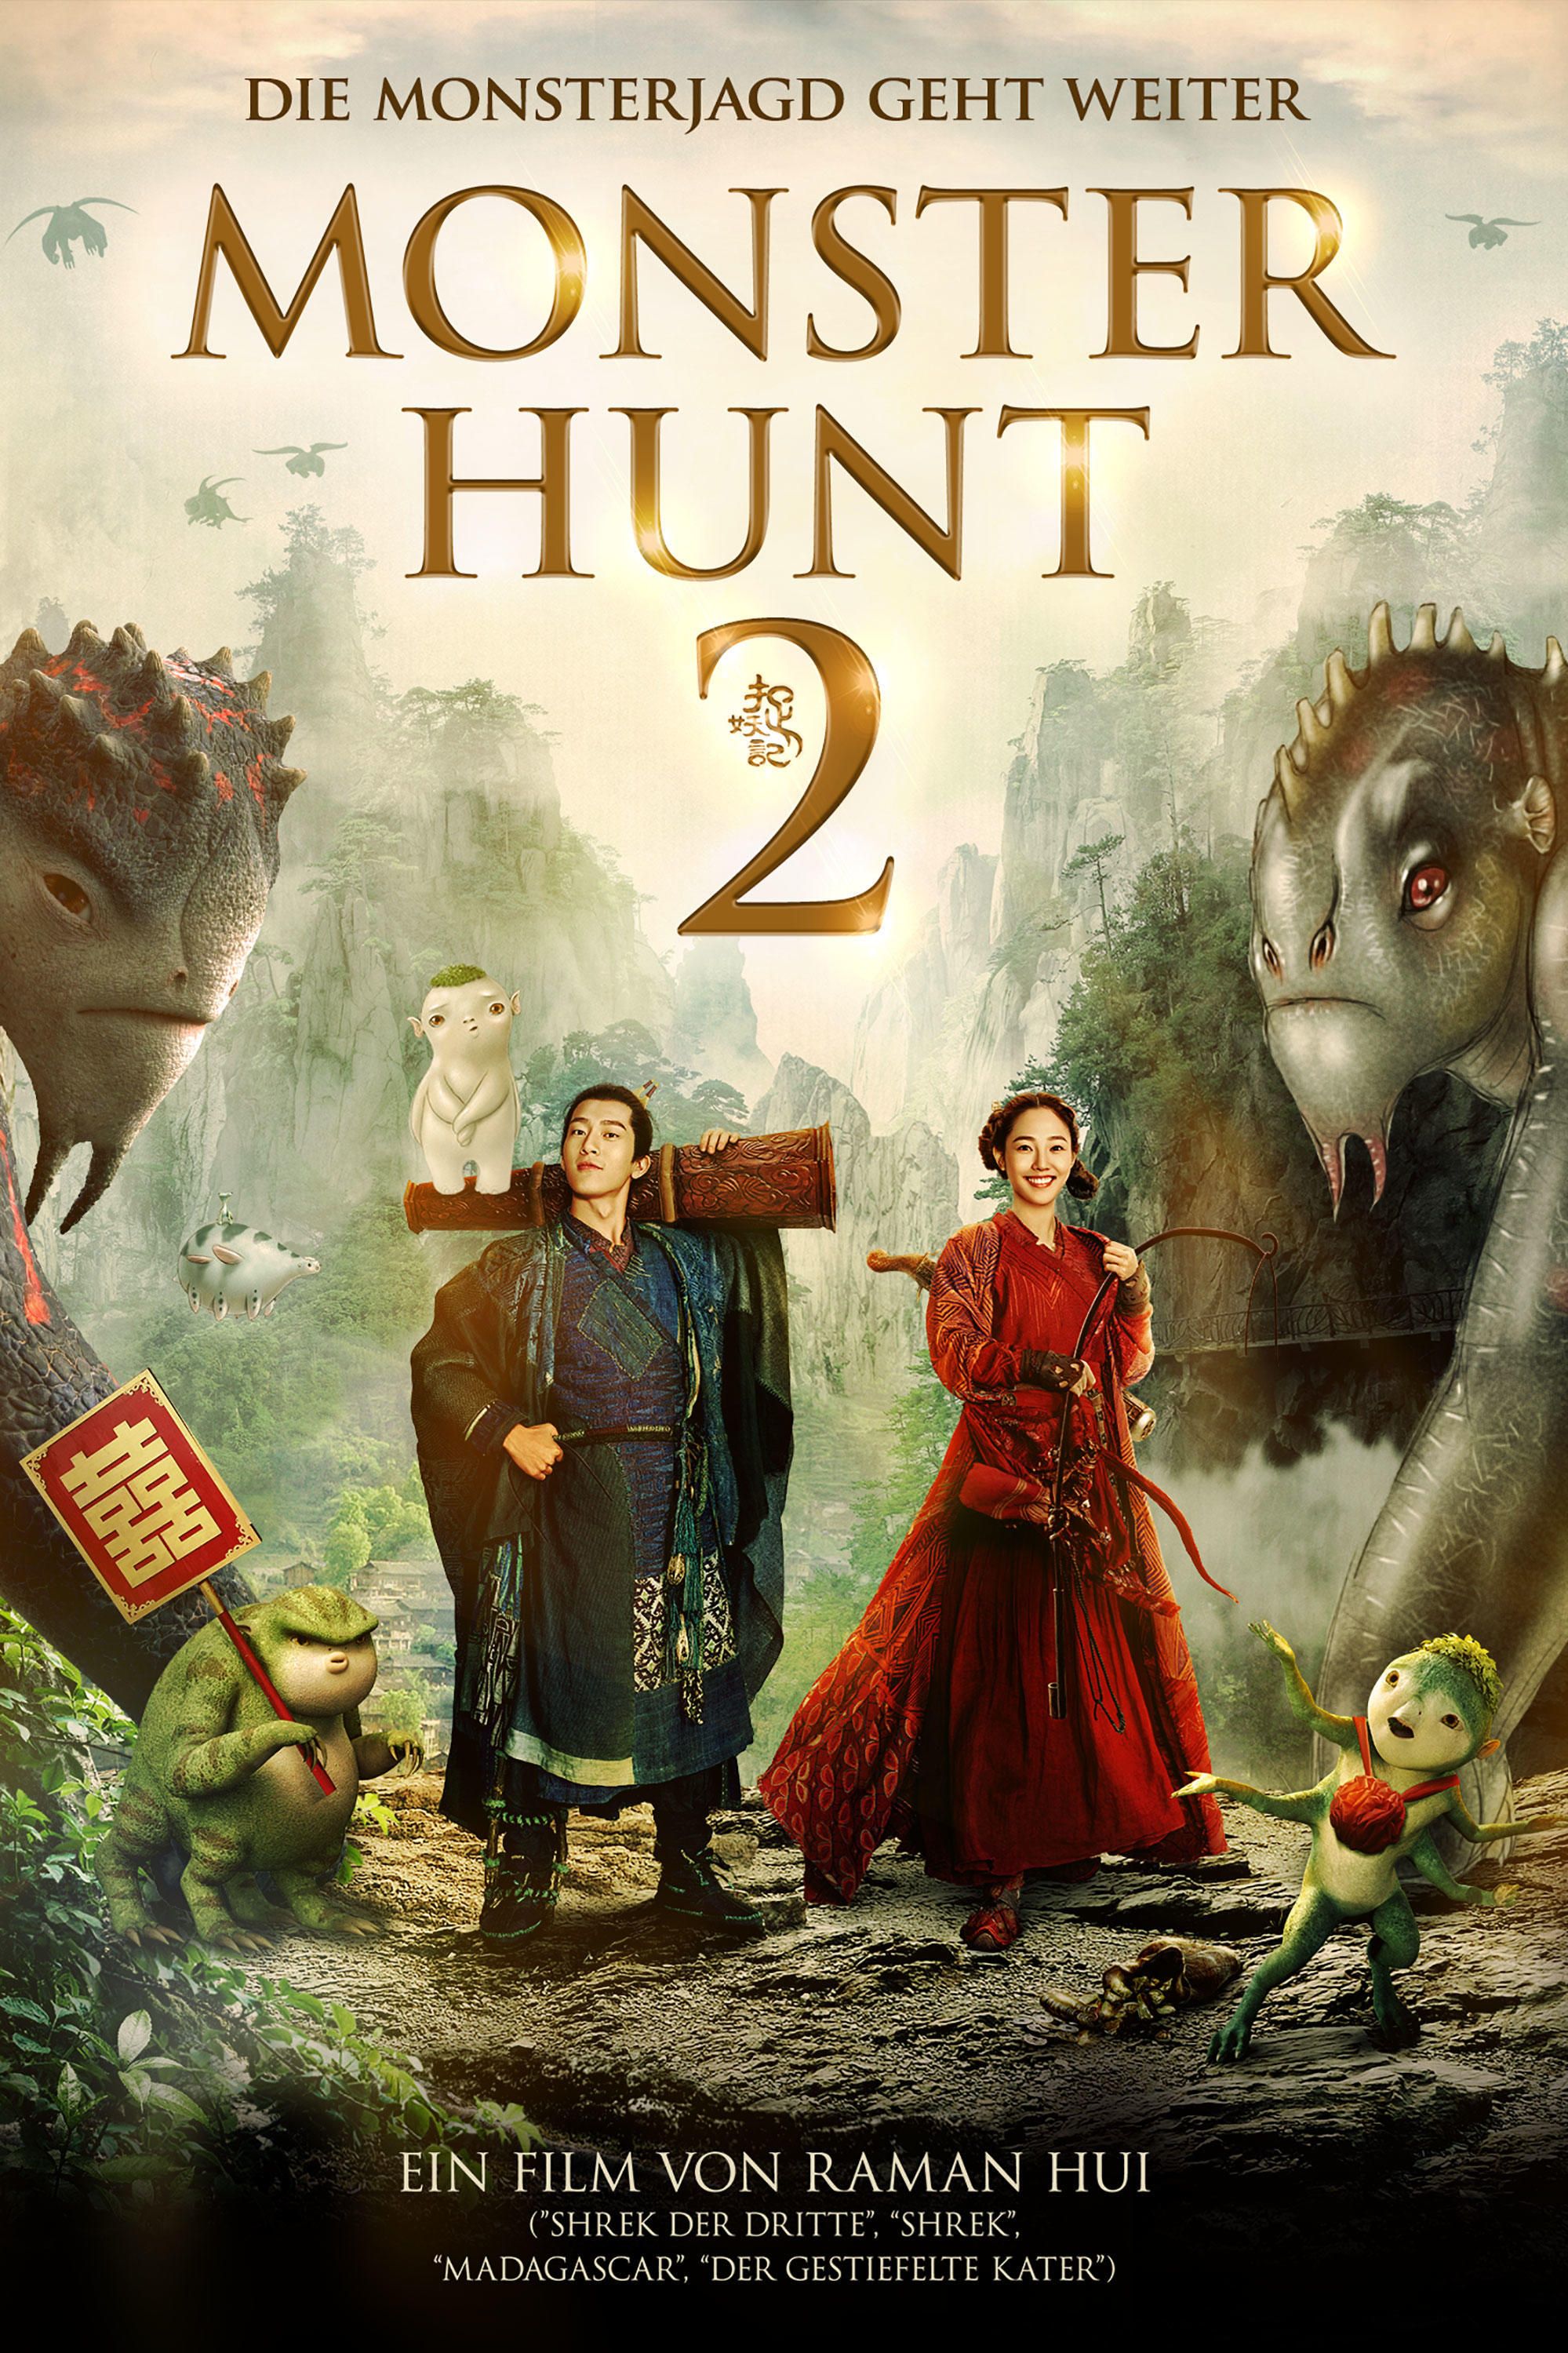 Monster Hunt 2' review: Too cloying for comfort - The Hindu